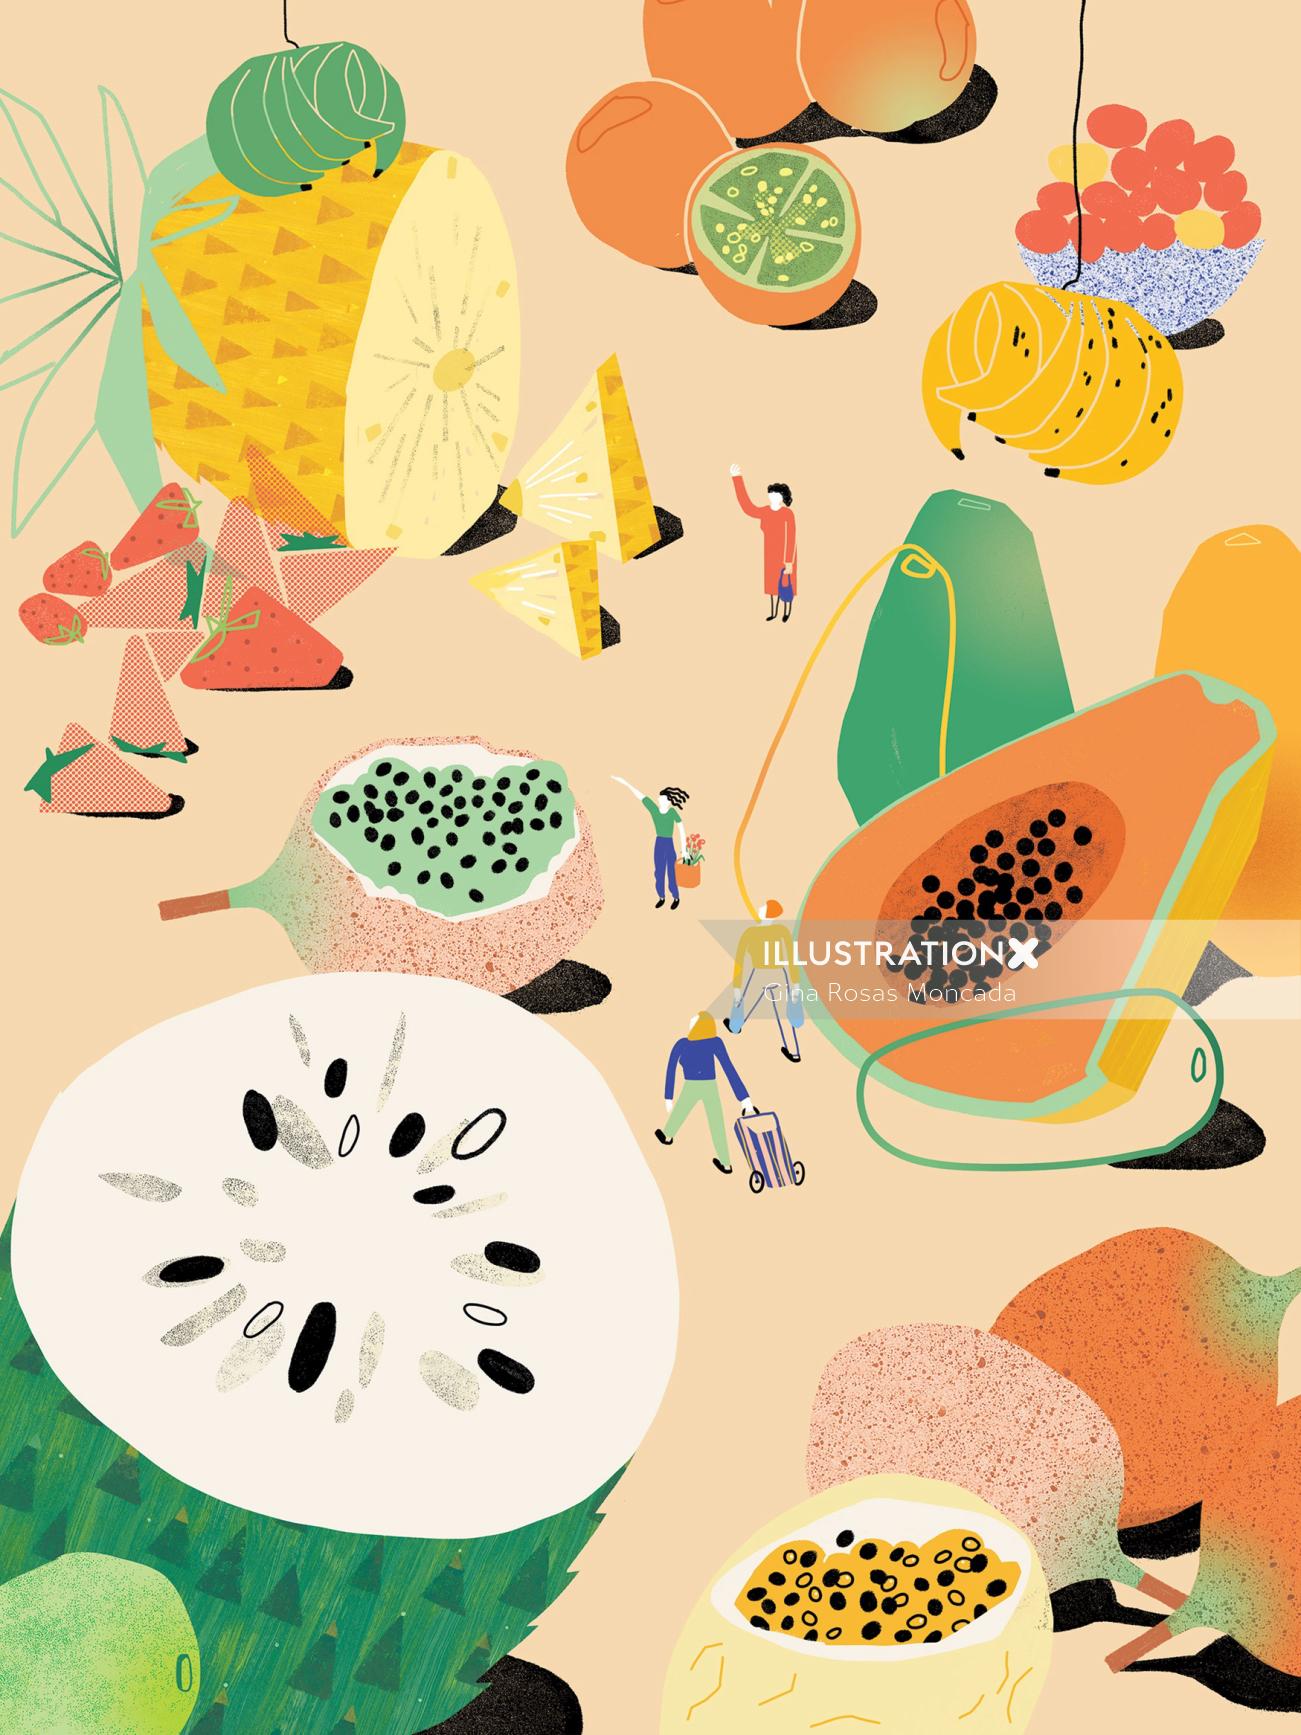 Editorial art of fruits by Gina Rosas for Heimat exhibition